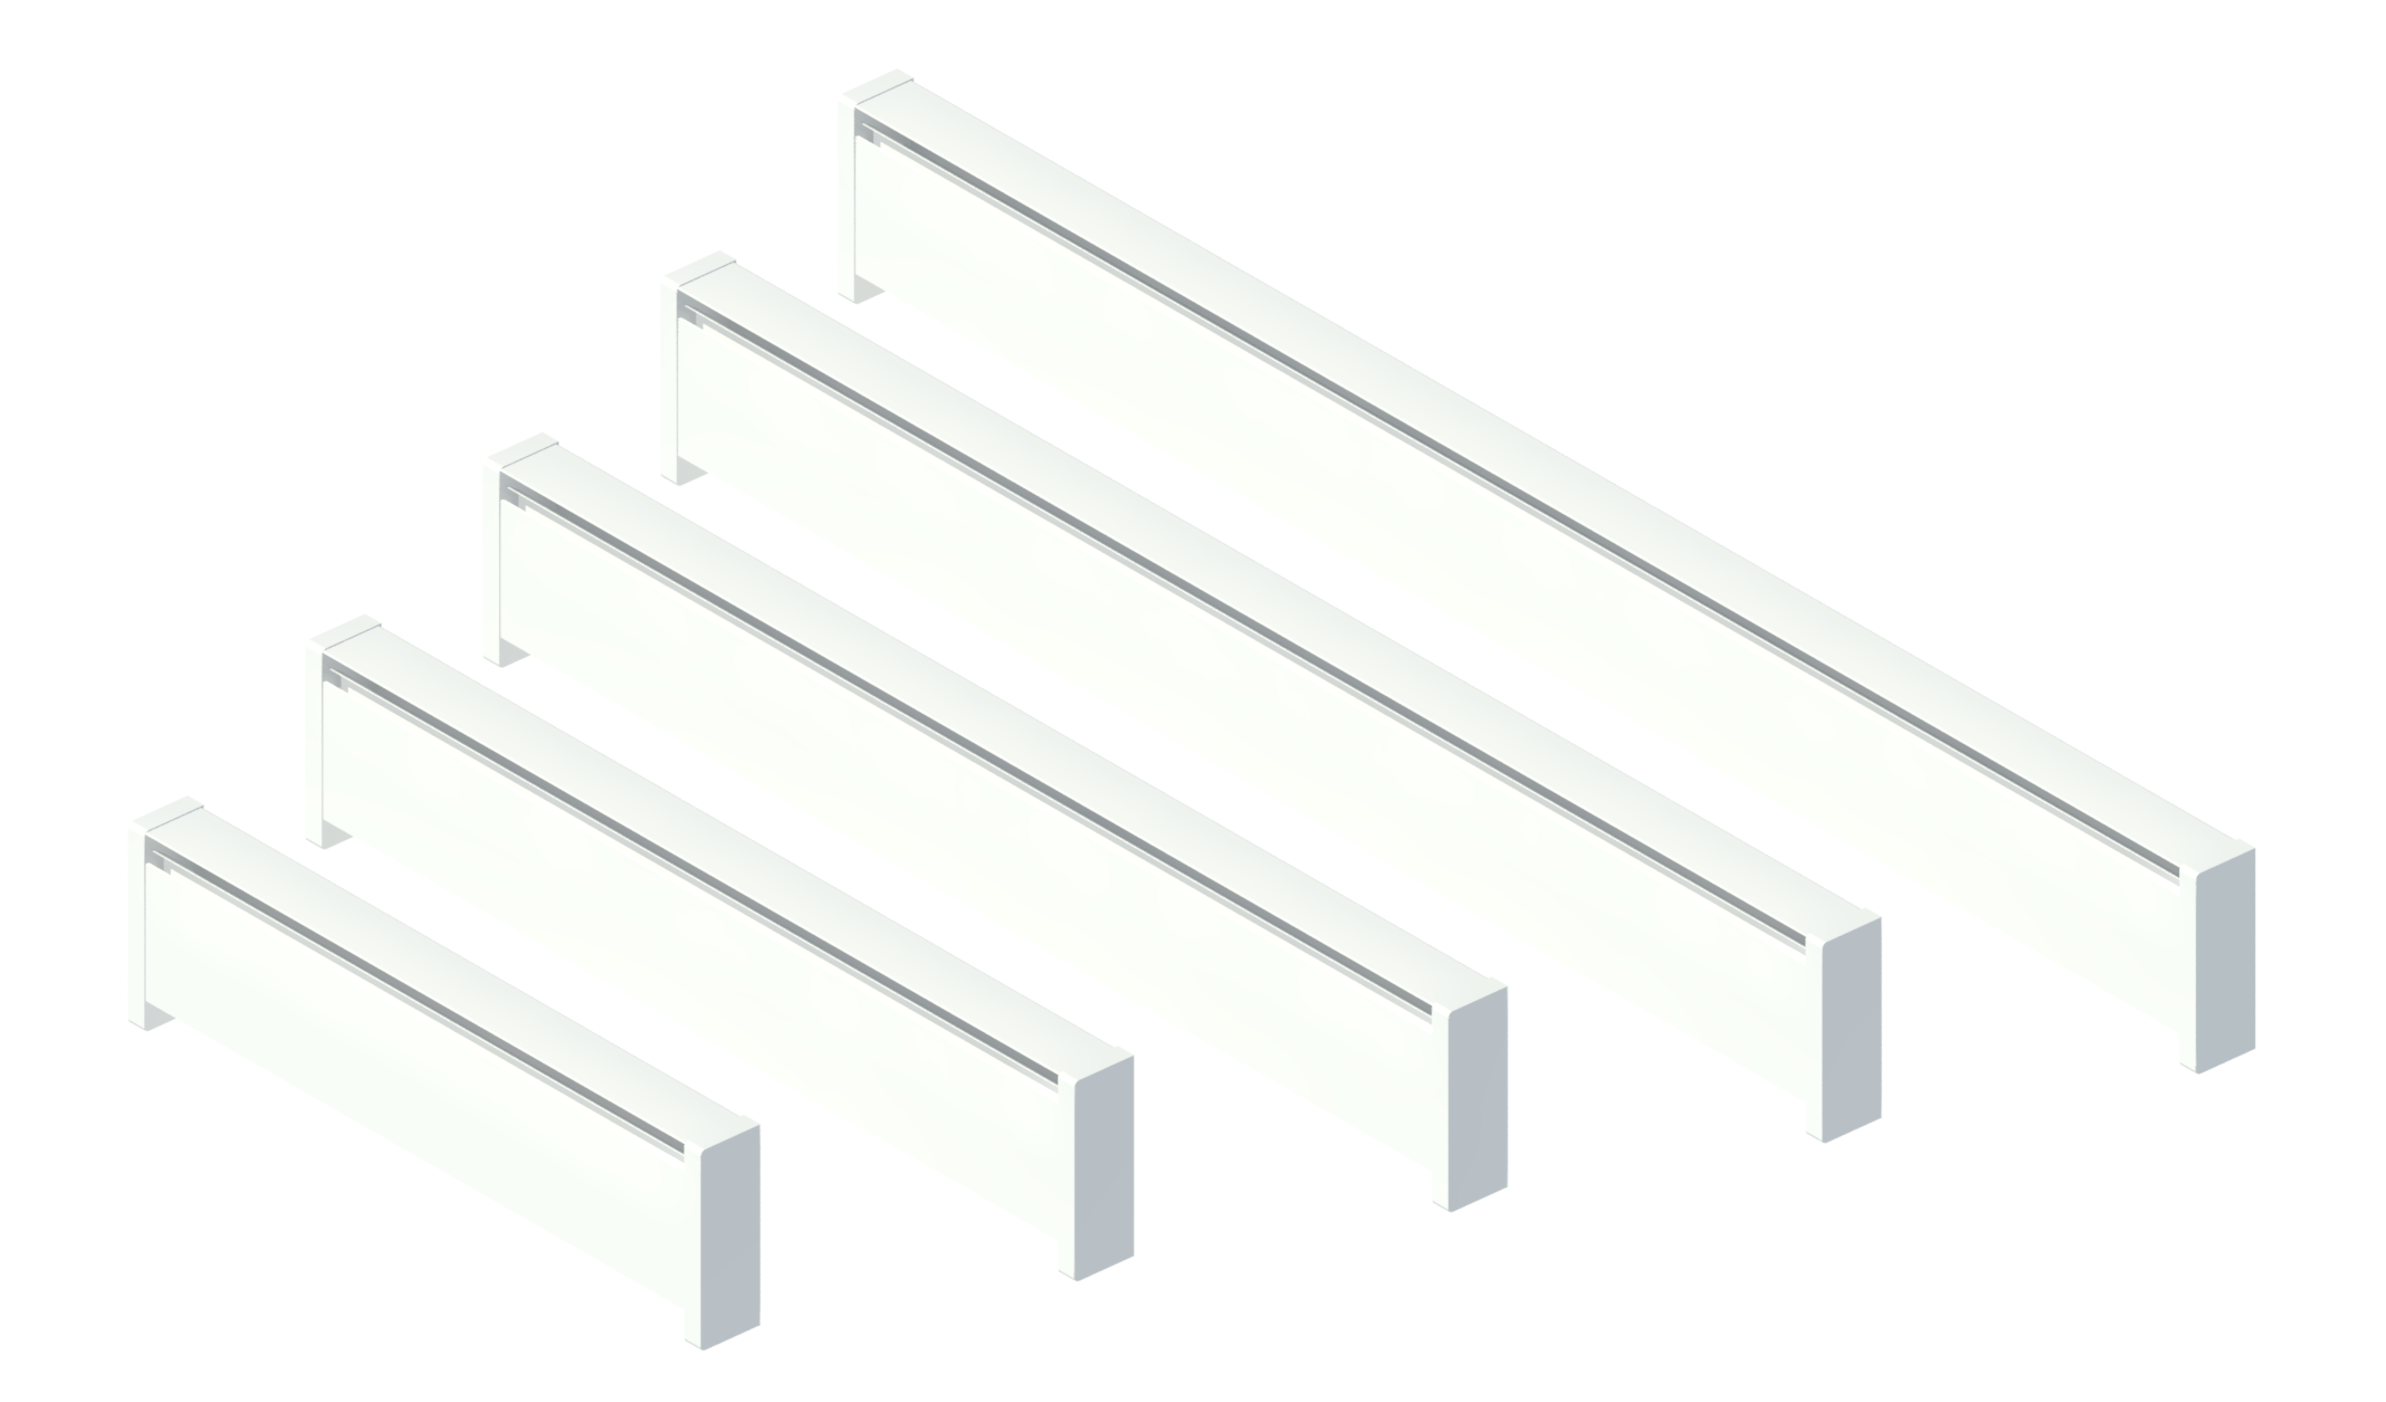 Render of multiple white, boxy, wall-mounted baseboard heaters from manufacturer Cadet in various lengths, which can be placed along a wall.